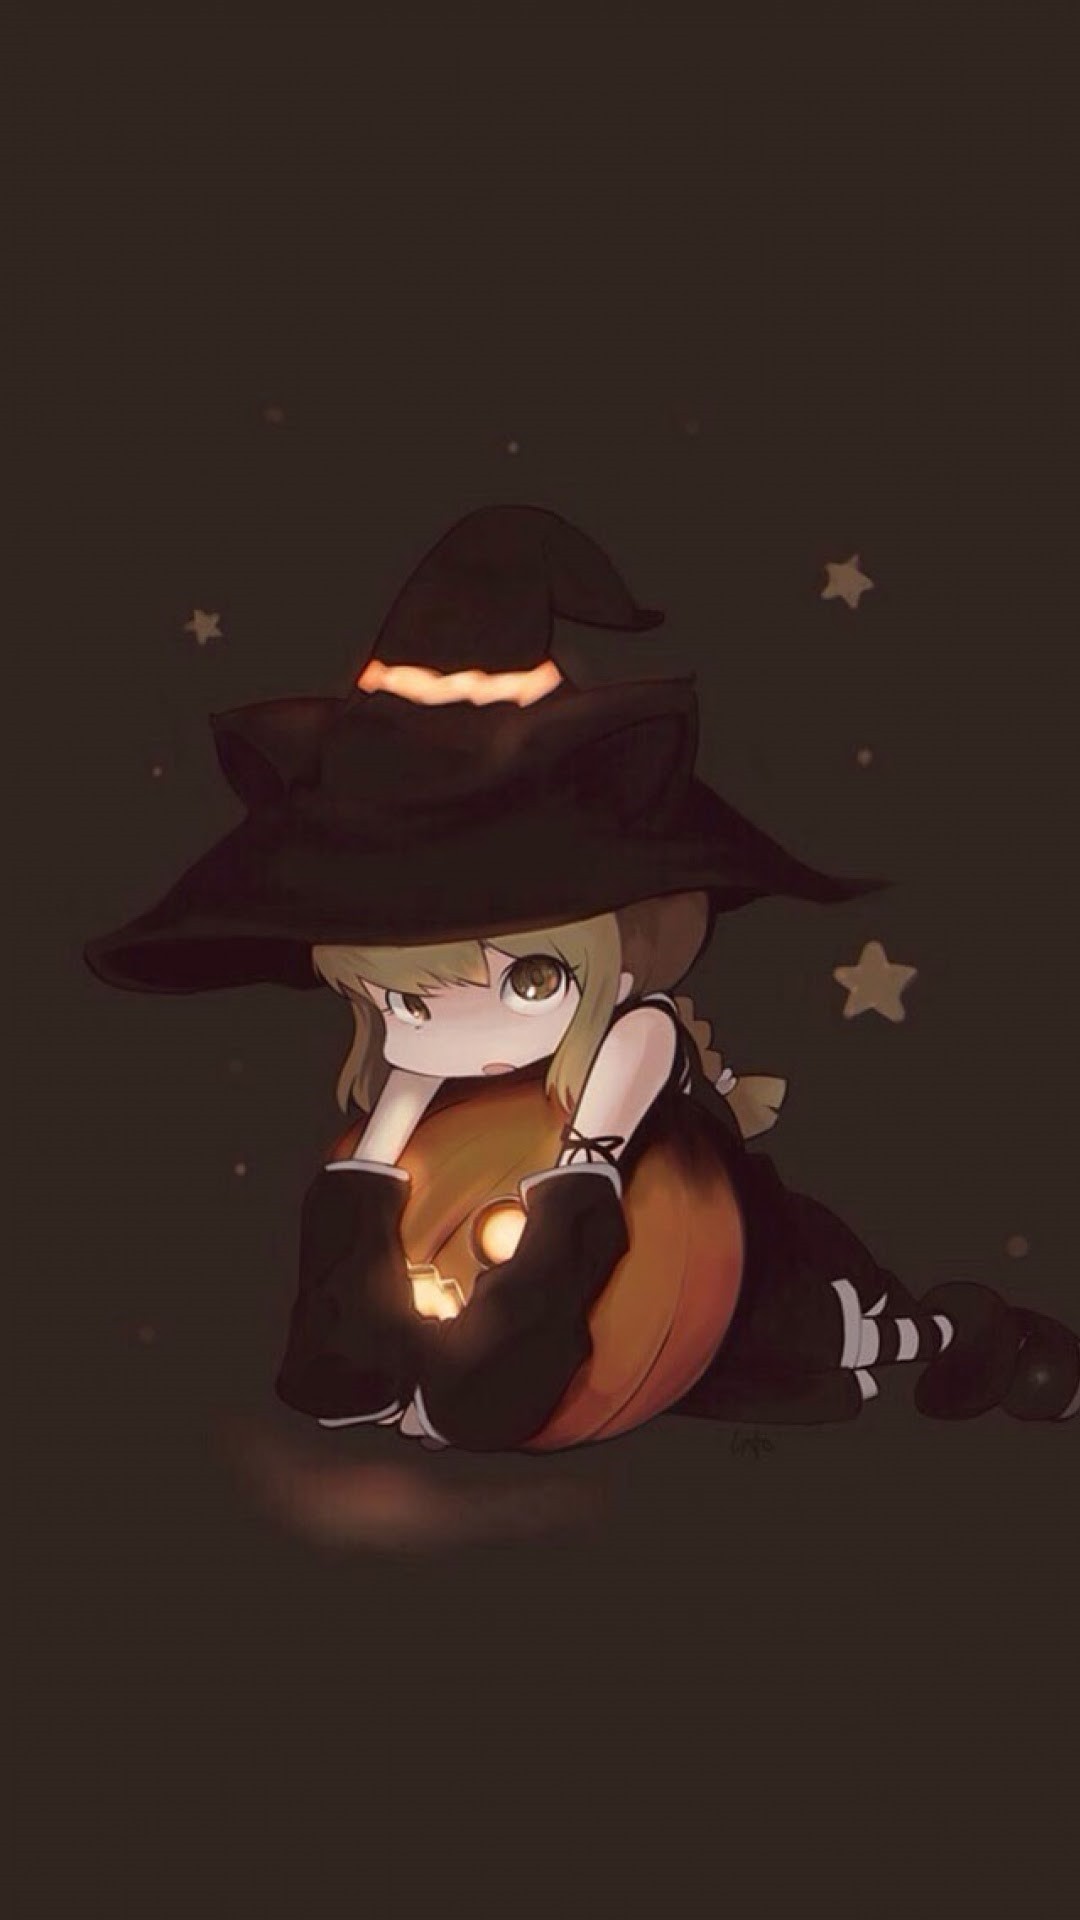 Halloween Wallpaper anime by obsessed-uwu on DeviantArt